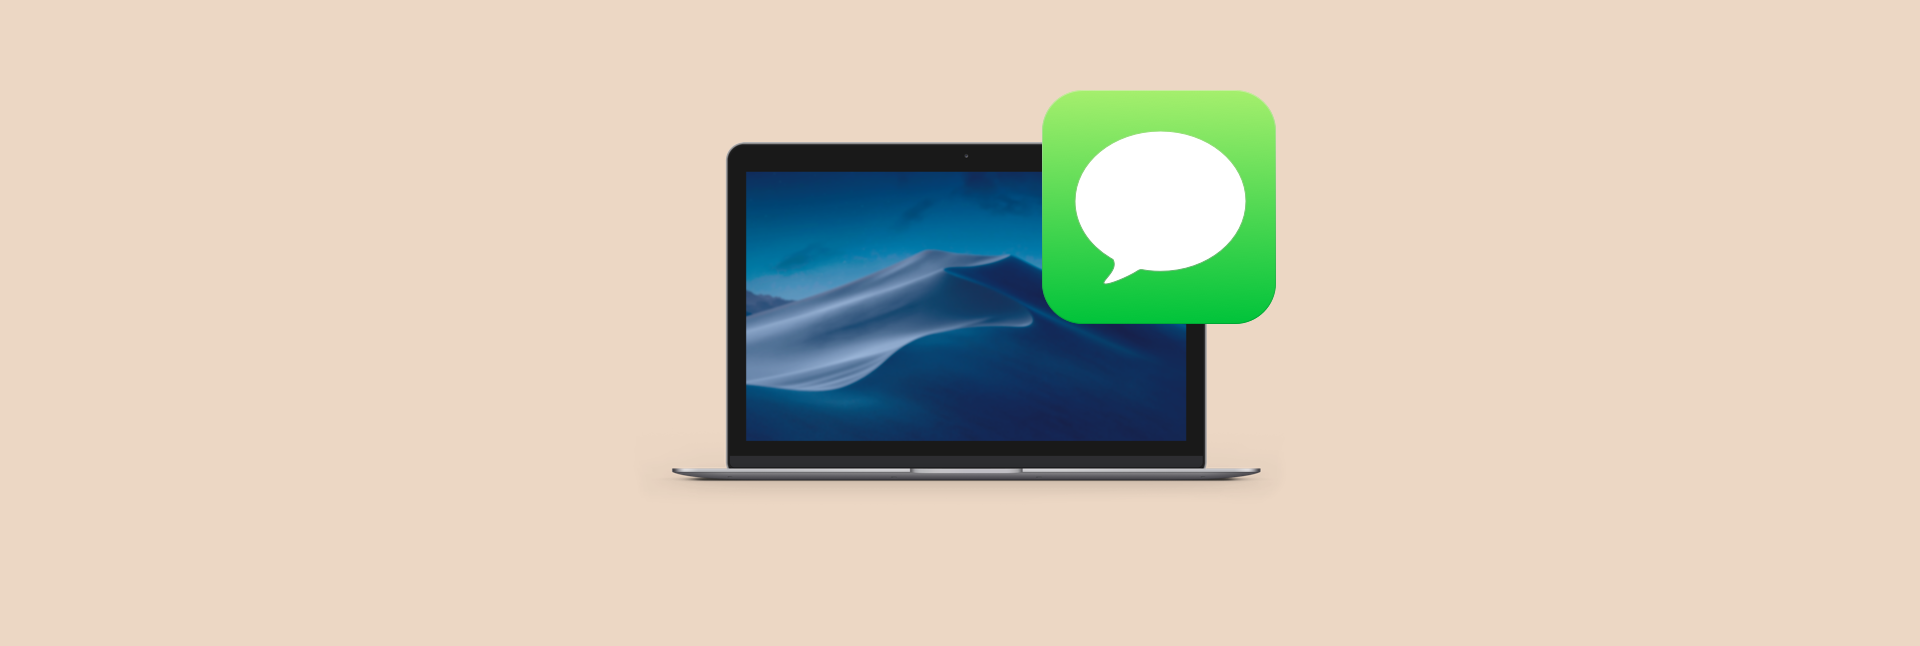 imessage download for laptop